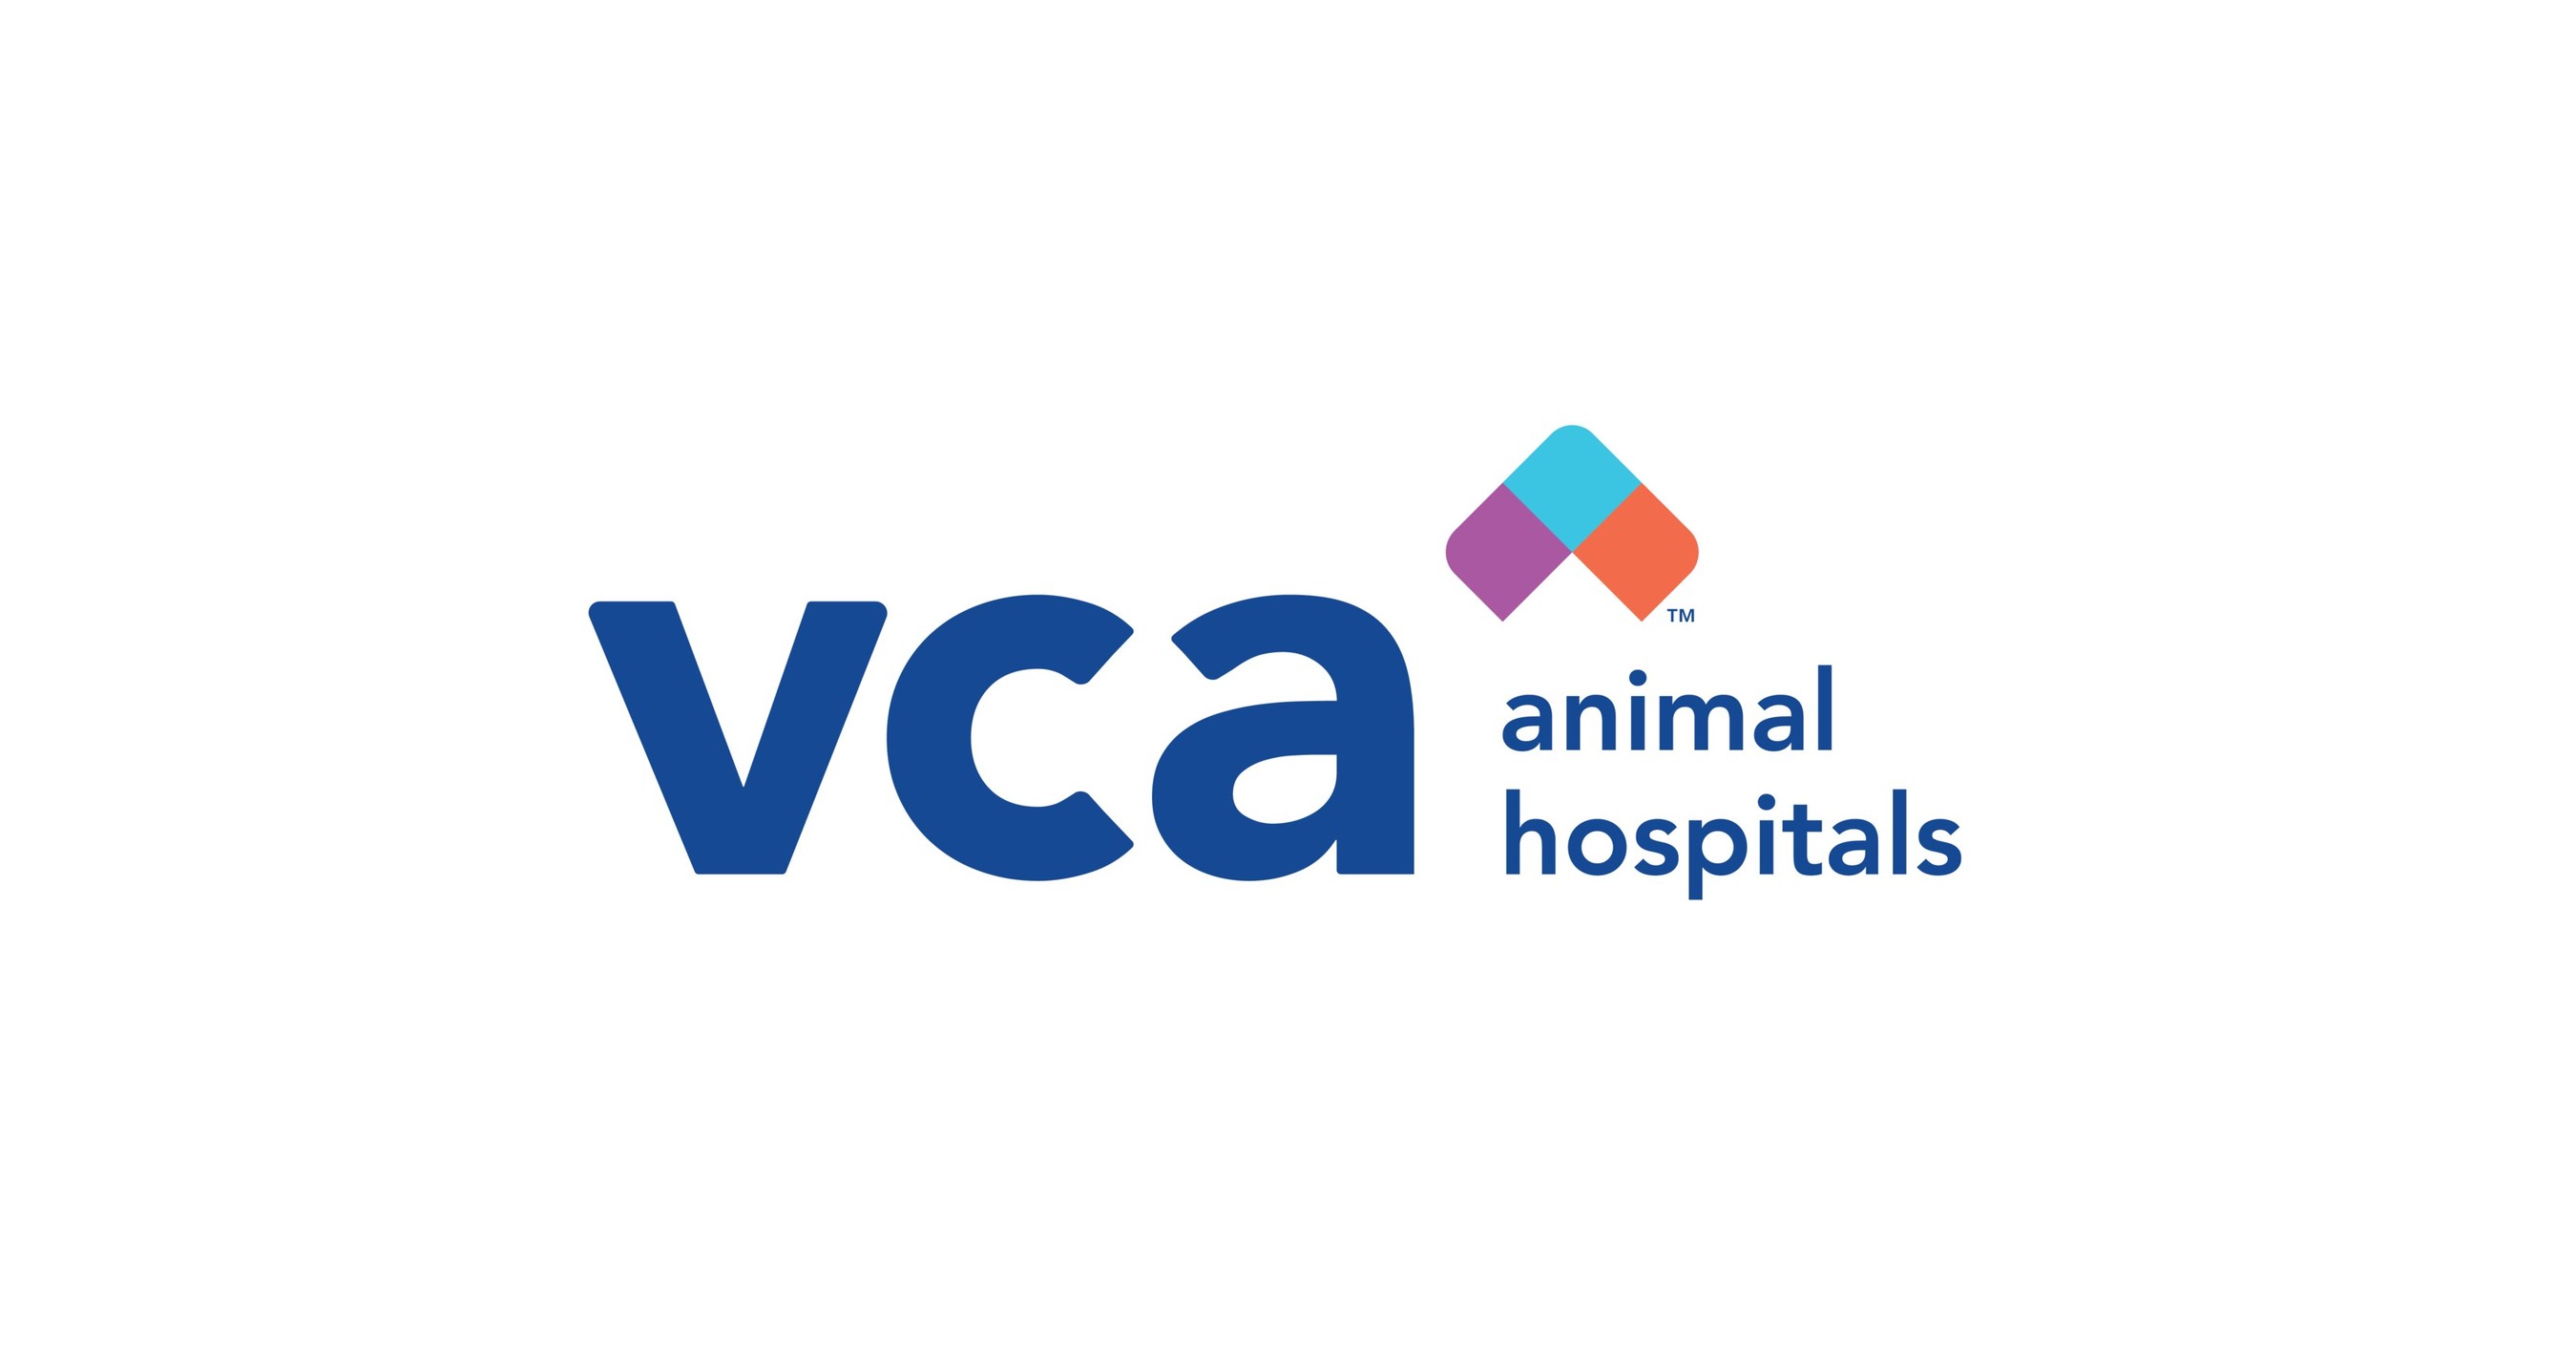 VCA Animal Hospitals Highlights Support for its People, Pets and the Planet  in New Impact Report